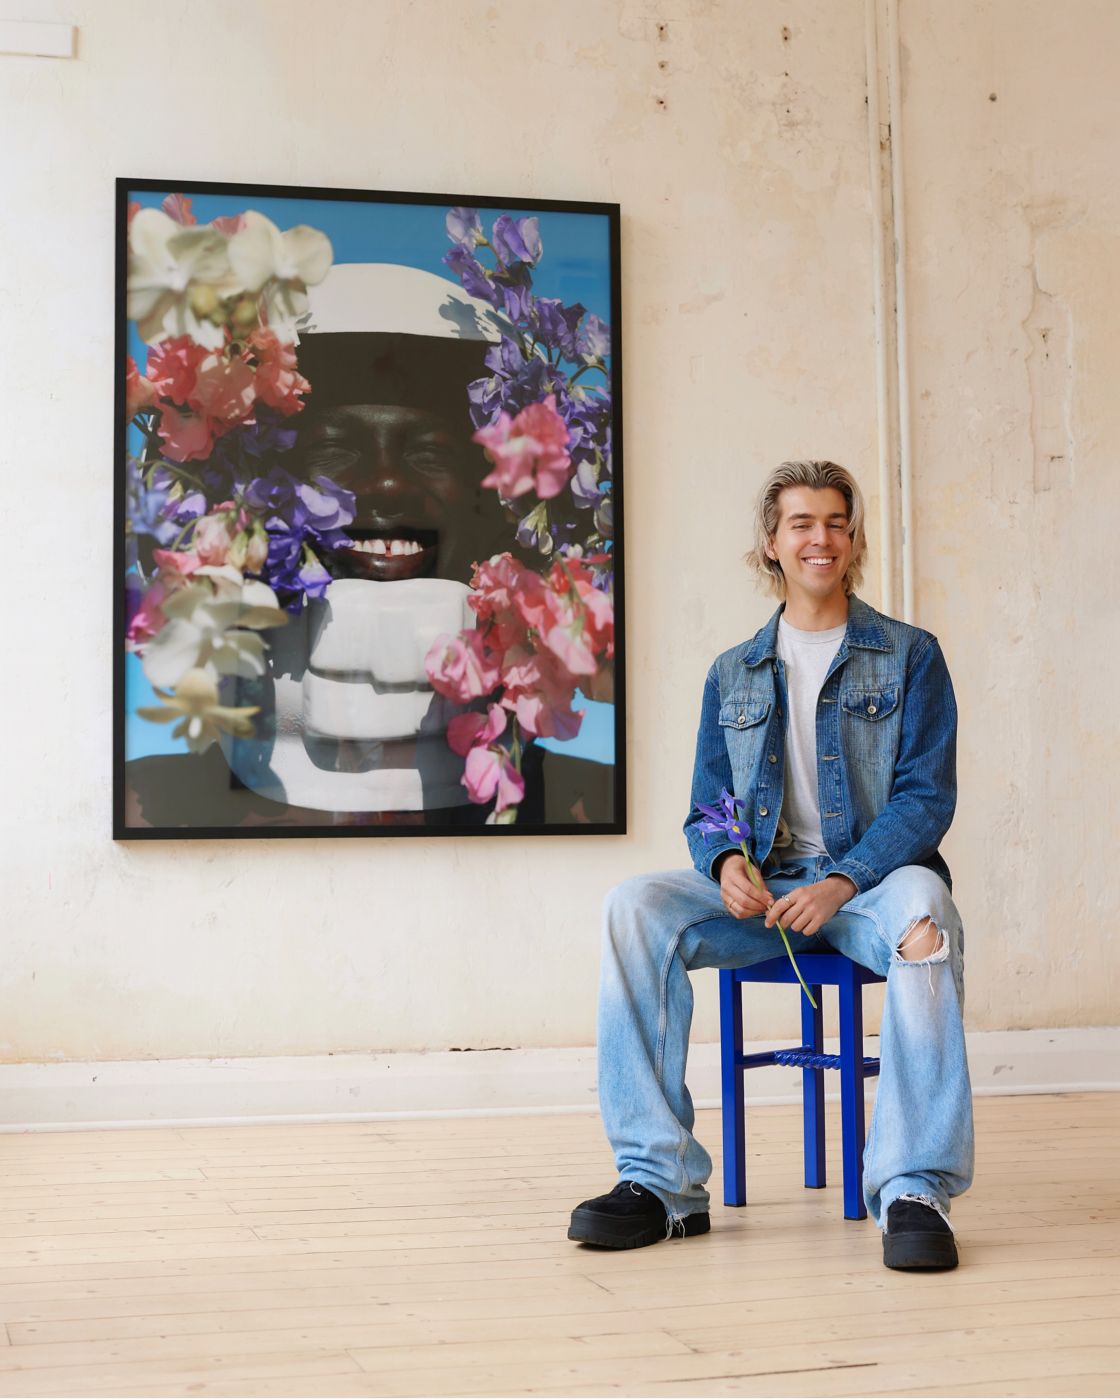 Jordan Drysdale sitting in front of one of his photographs